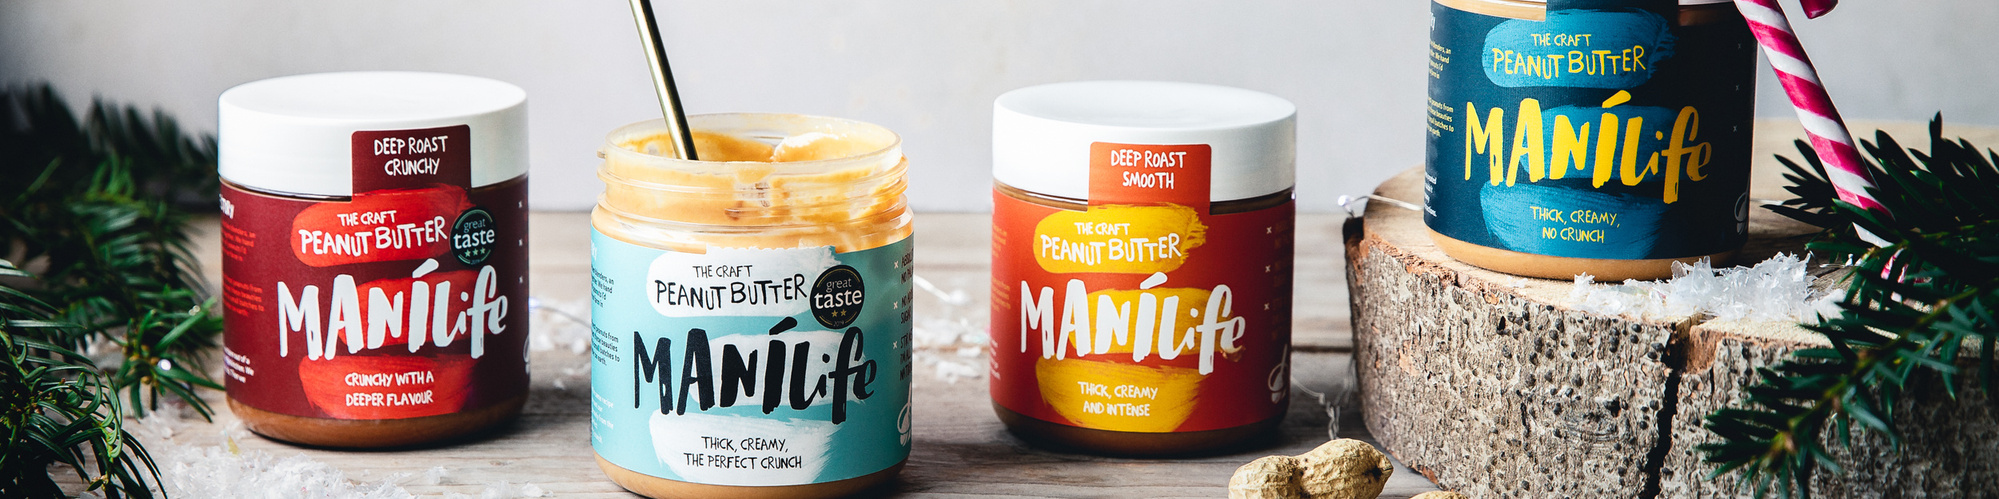 manilife-peanut-butter-range-food-product-photography